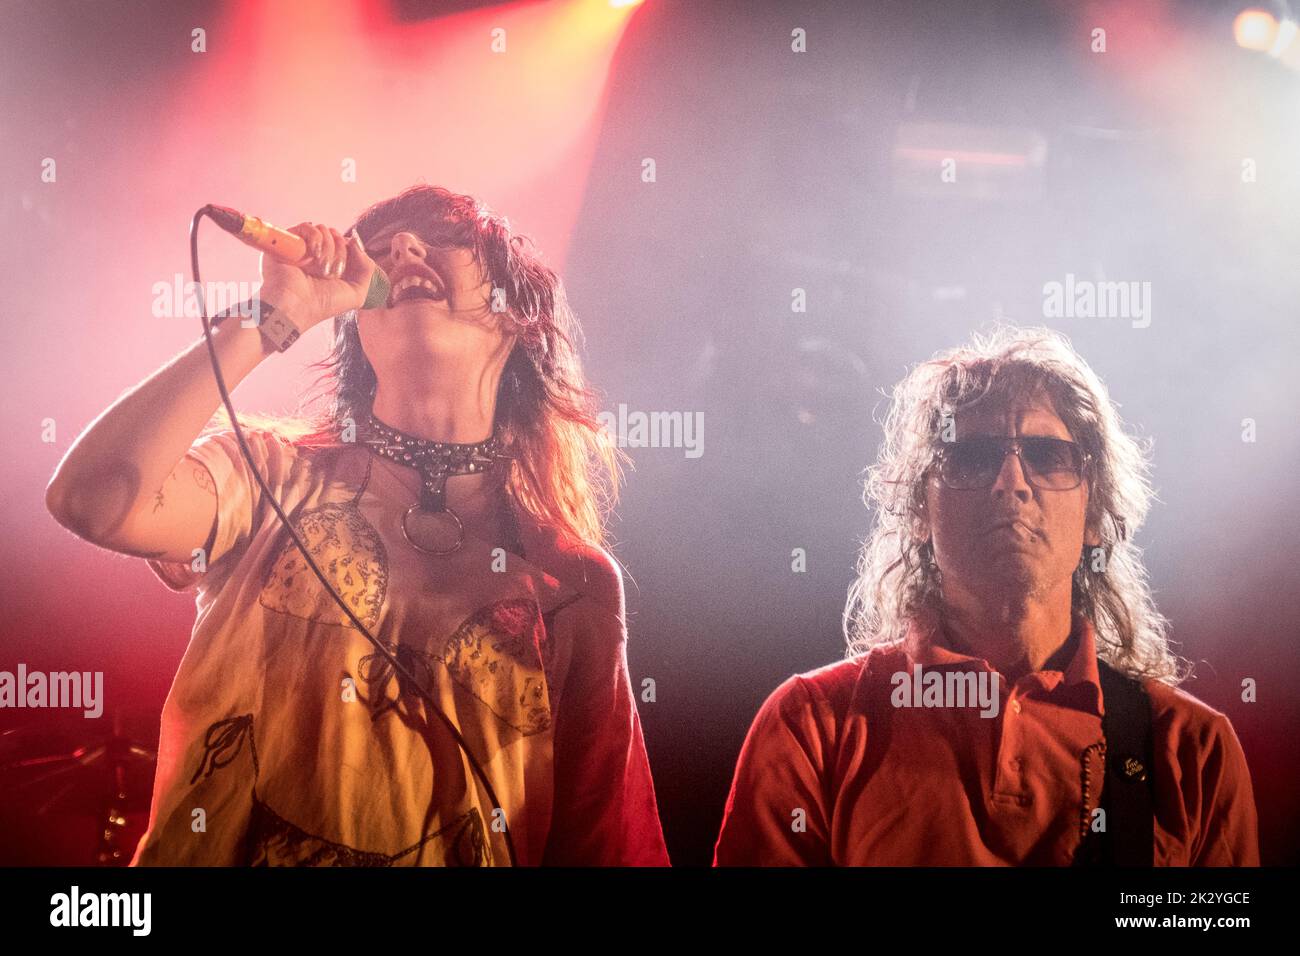 Roskilde, Denmark. 03rd, July 2022. The American punk rock band Surfbort performs a live concert at the Danish music festival Roskilde Festival 2022 in Roskilde. Here singer Dani Miller is seen live on stage. (Photo credit: Gonzales Photo - Thomas Rasmussen). Stock Photo